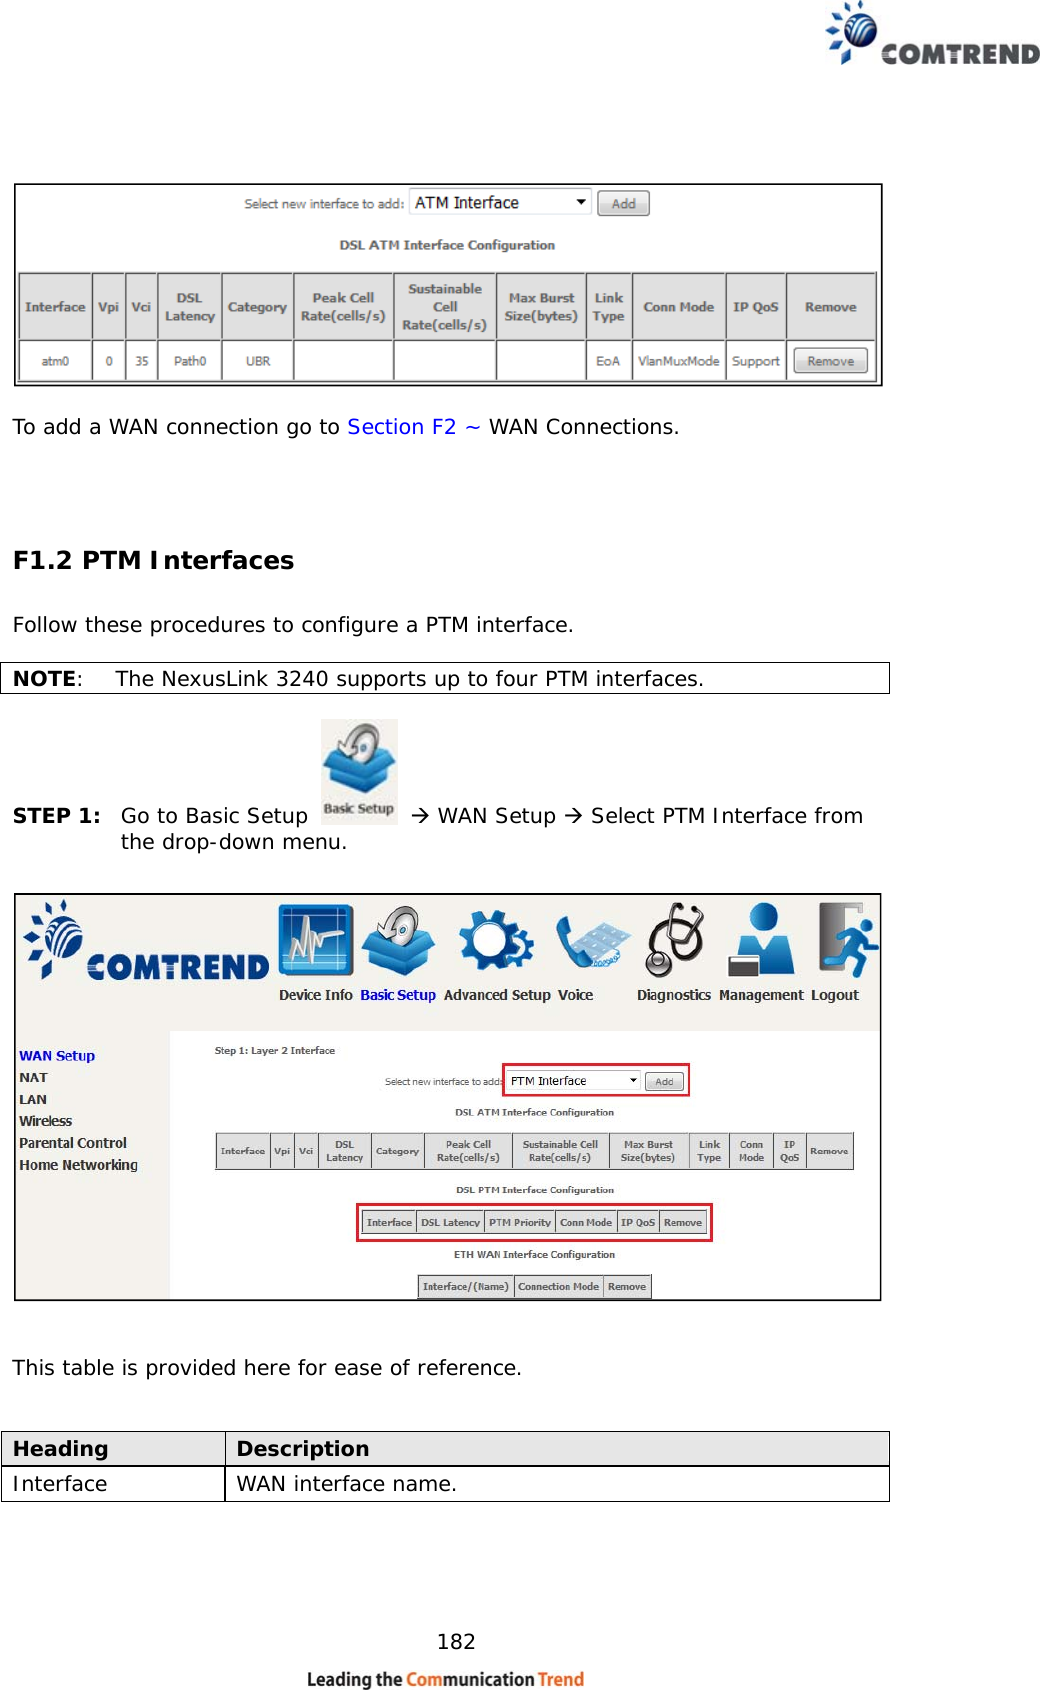    182     To add a WAN connection go to Section F2 ~ WAN Connections.  F1.2 PTM Interfaces Follow these procedures to configure a PTM interface.    NOTE:  The NexusLink 3240 supports up to four PTM interfaces.   STEP 1:  Go to Basic Setup    WAN Setup  Select PTM Interface from the drop-down menu.     This table is provided here for ease of reference.   Heading  Description Interface  WAN interface name. 